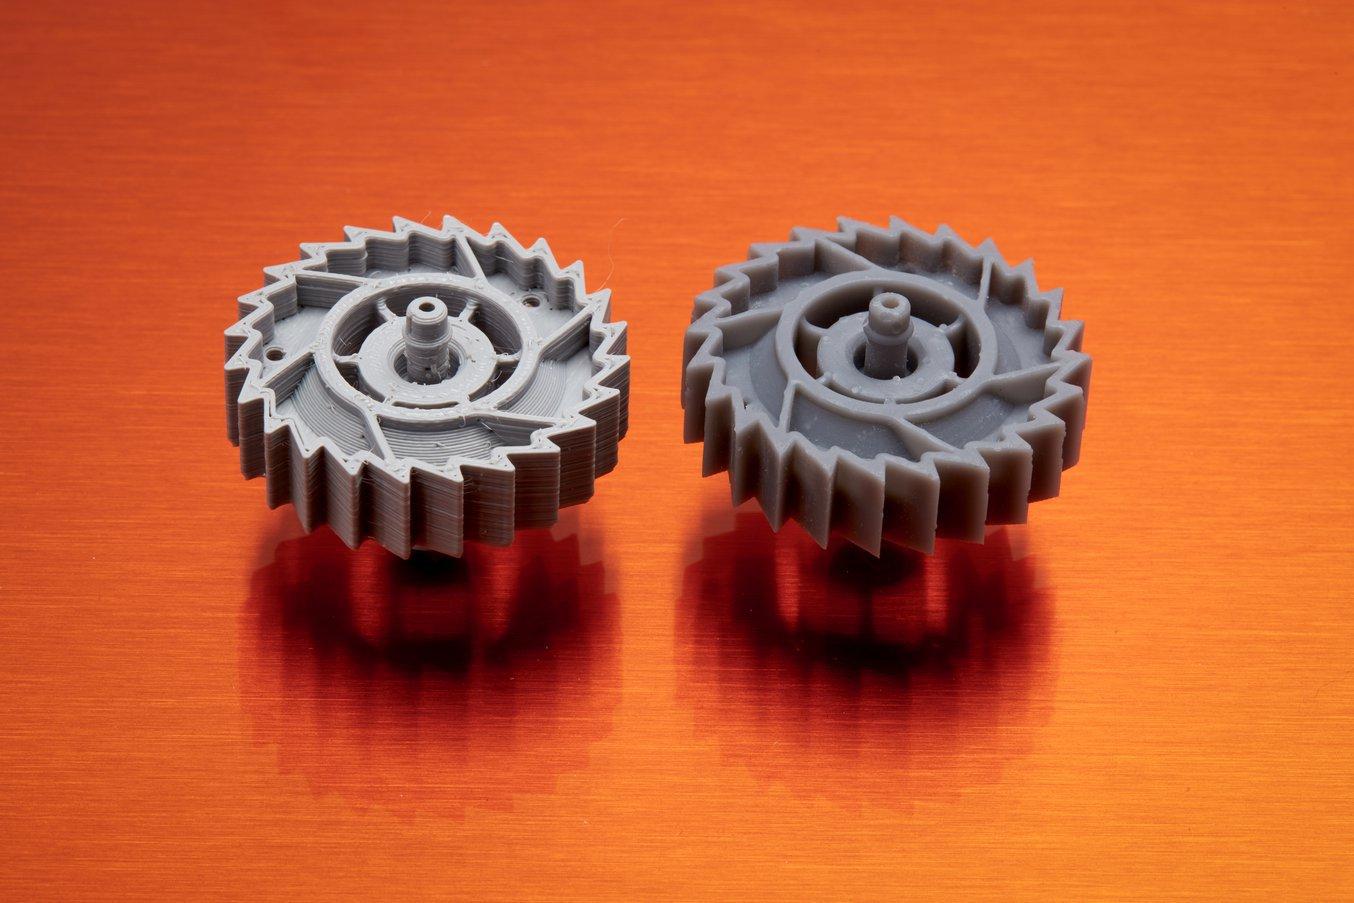 SLA 3D printers (right) offer higher resolution and can produce significantly smoother and more detailed prints than FDM 3D printer (left).